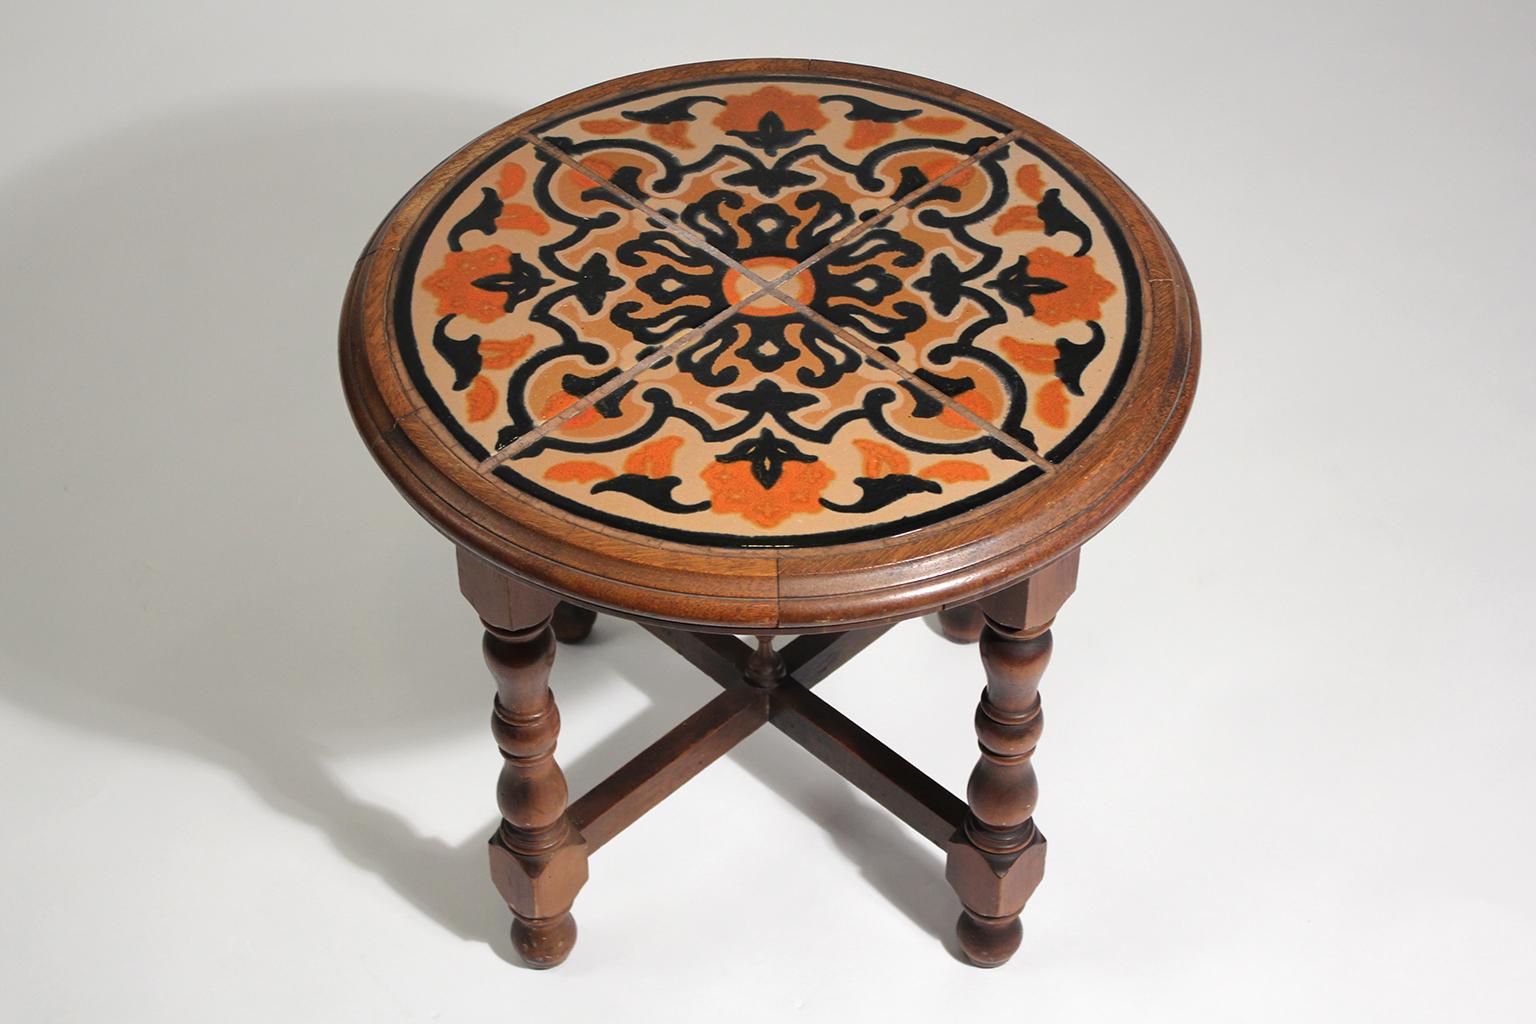 Beautiful original antique California Mission Taylor wood and tile top table dating from the 1920s. Has 4 beautiful tiles inlaid into a wooden table. In nice original condition with great color. Rare circle shape and color.